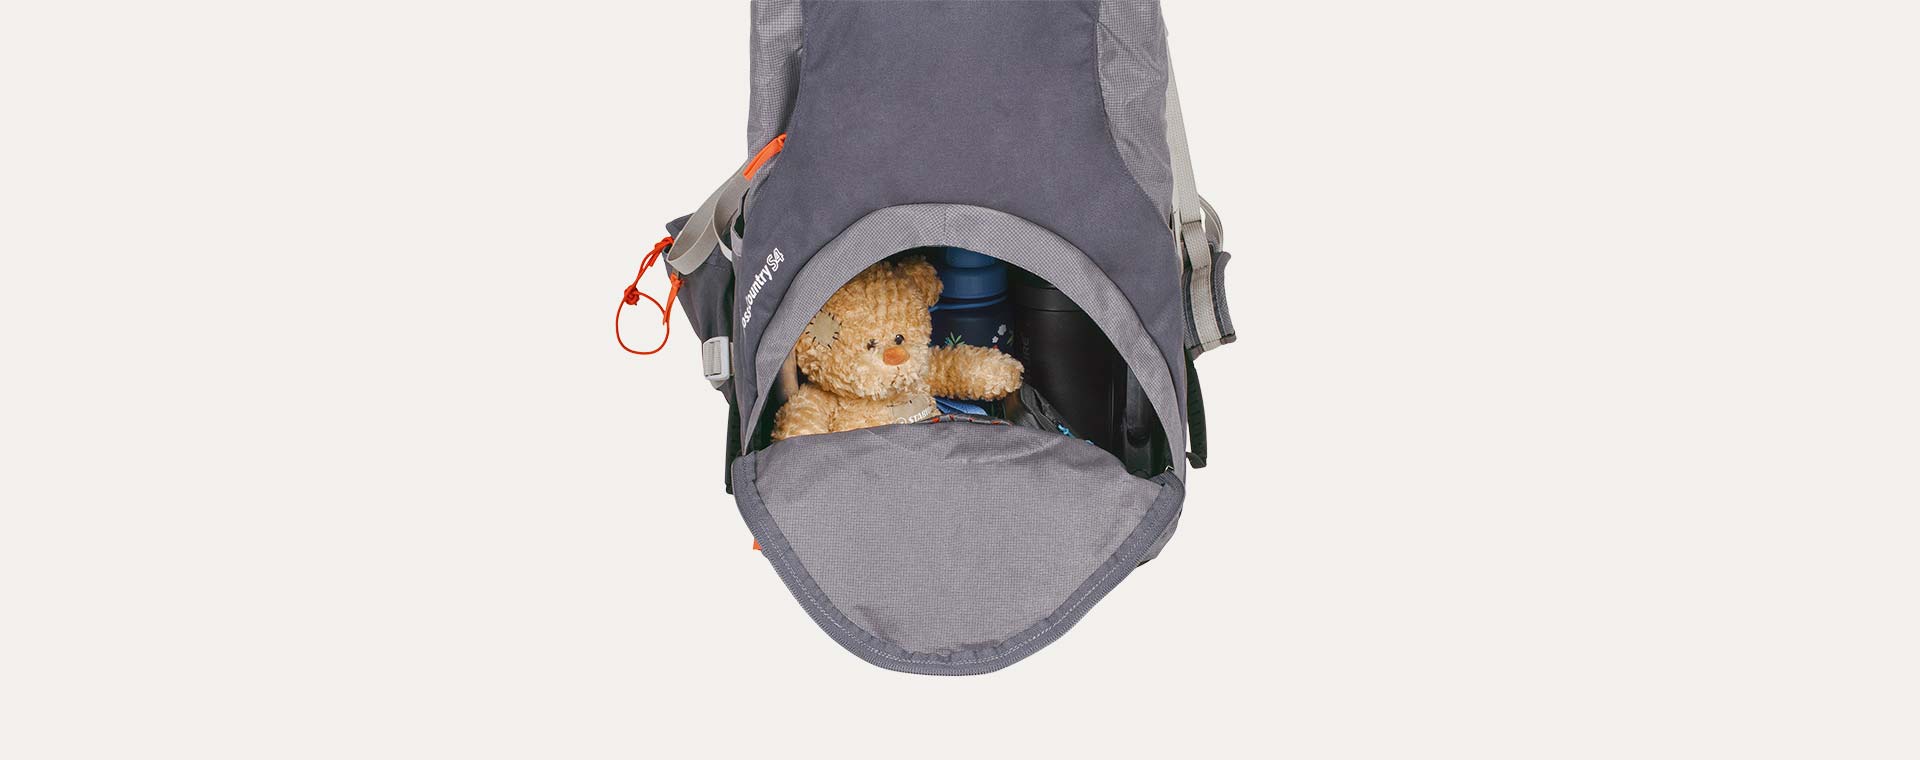 Grey LittleLife Cross Country S4 Child Carrier